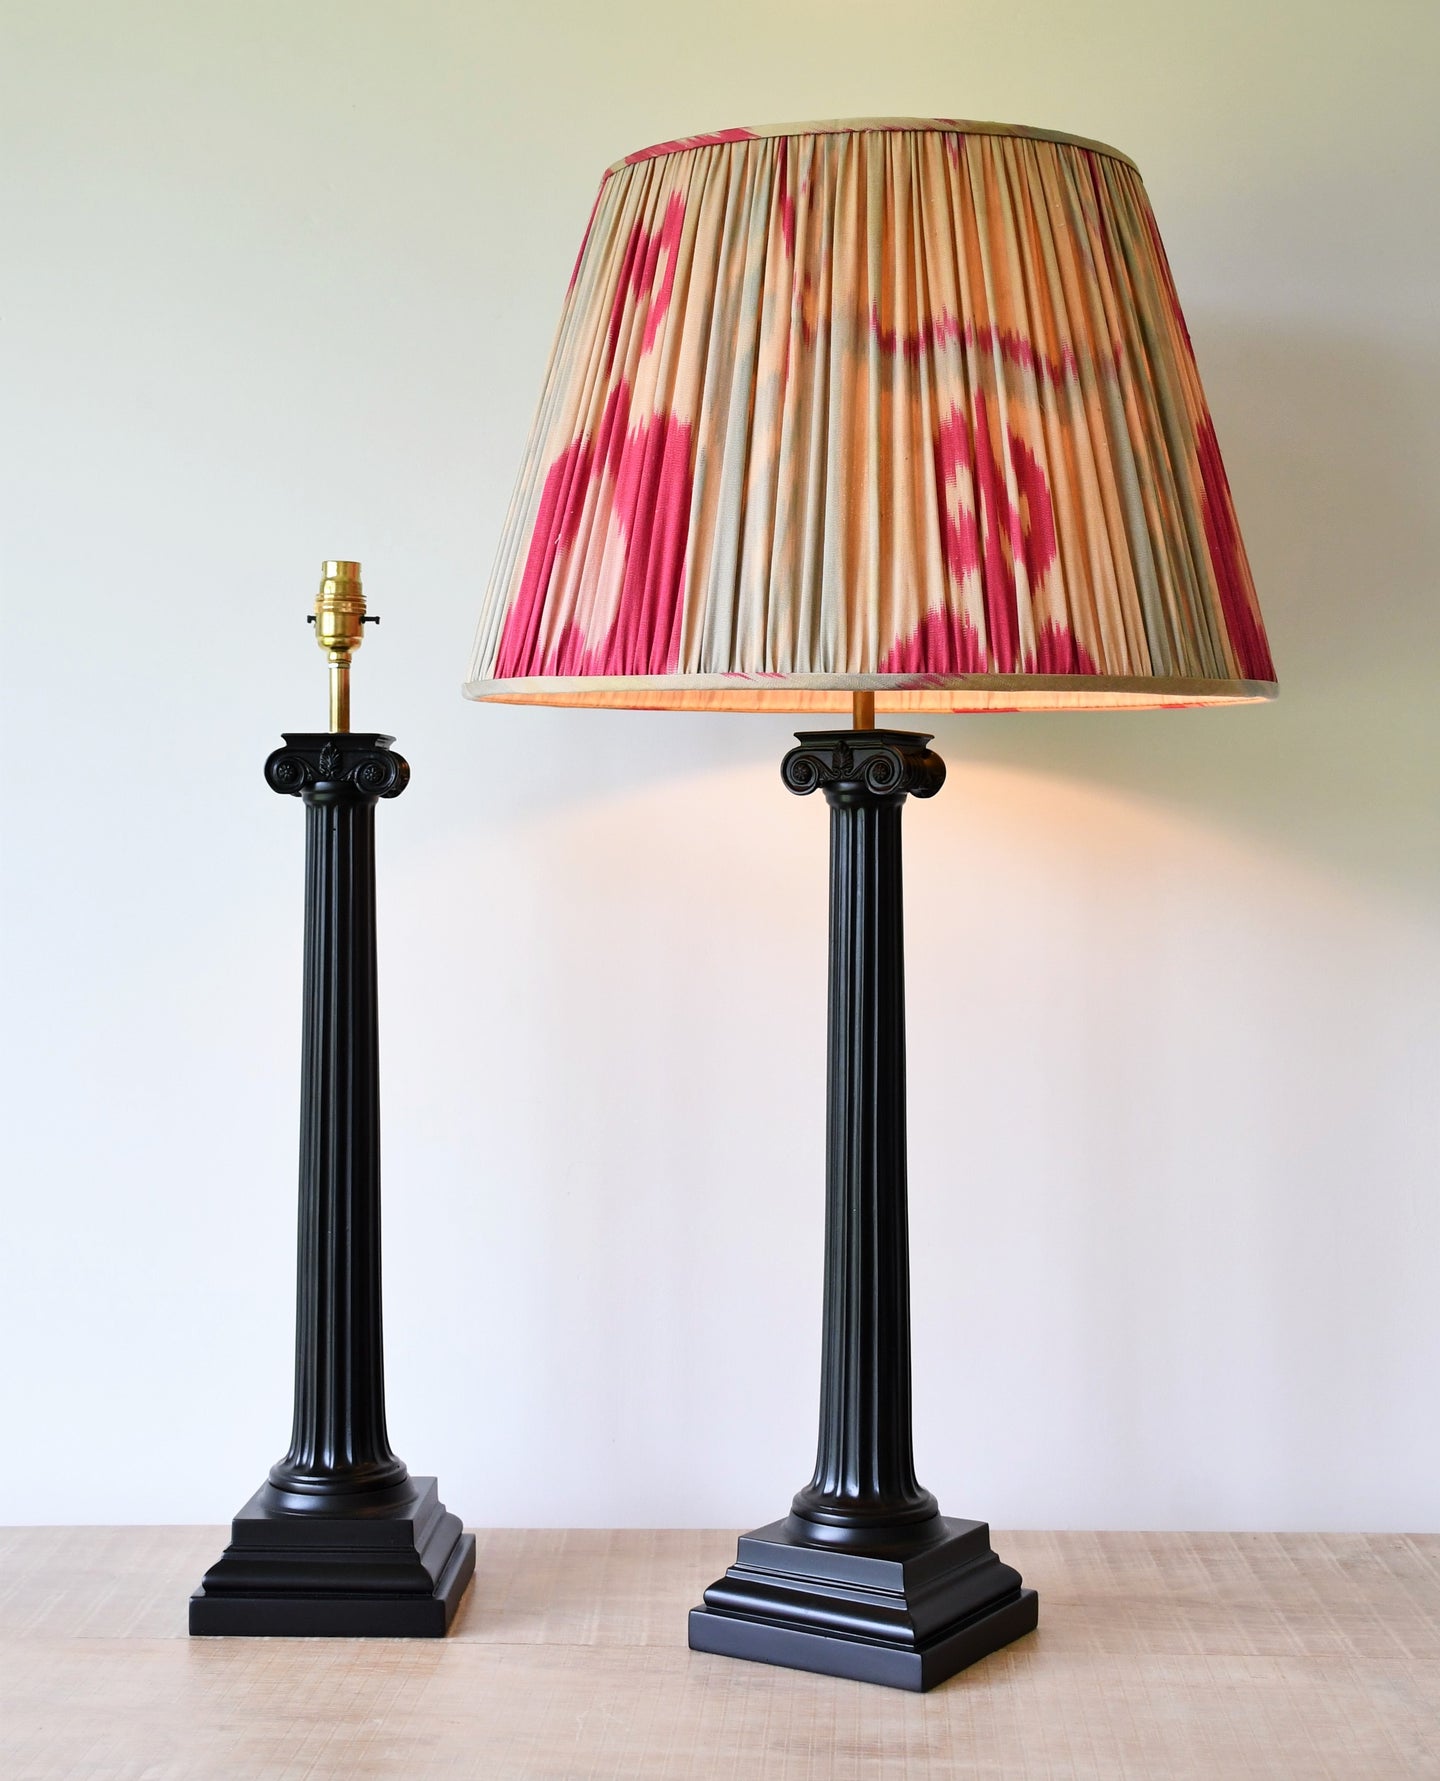 A Pair of Vintage - Classical Table Lamps